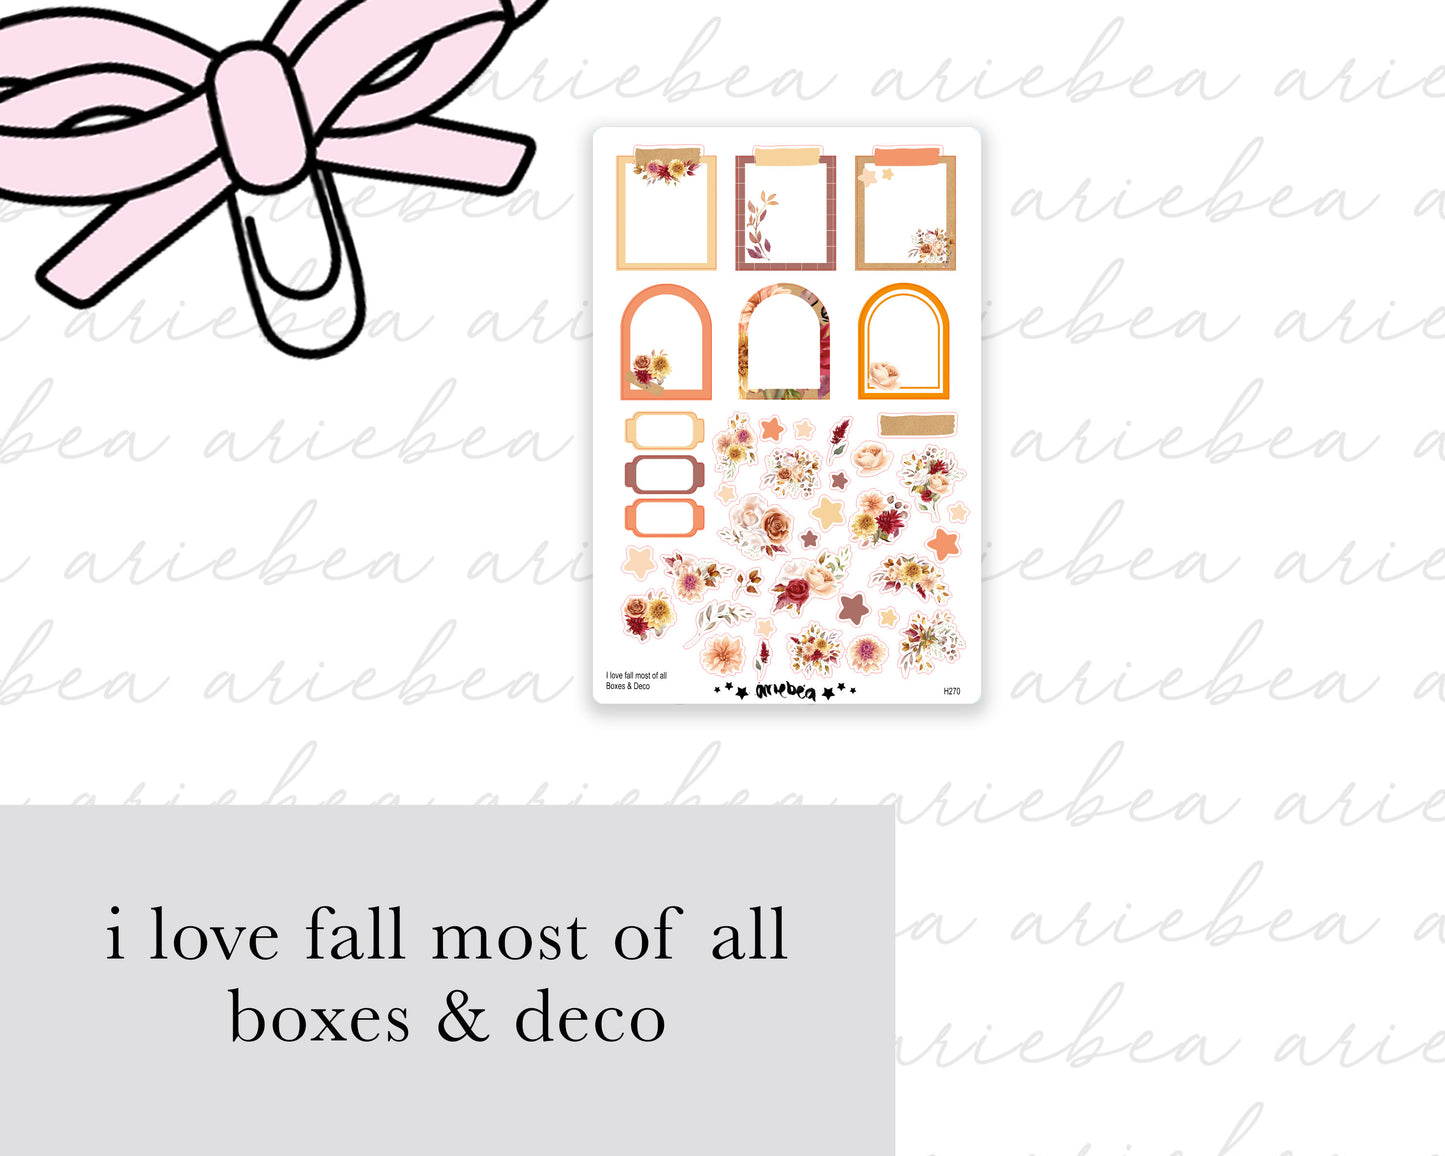 I Love Fall Most Of All Boxes & Deco